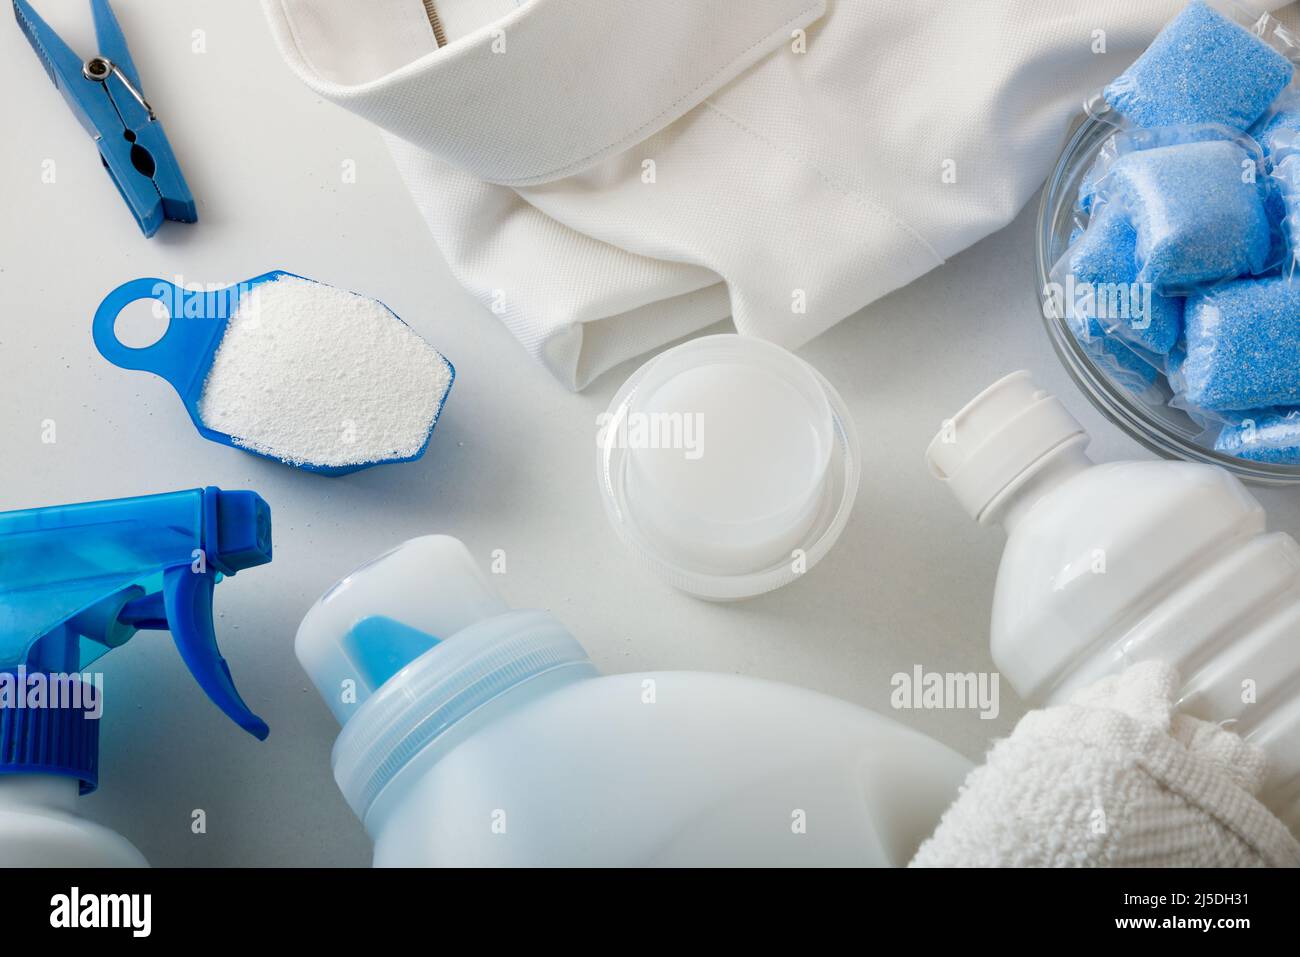 Detail of cleaning products for white clothes with shirt and towel on white table. Top view. Horizontal composition. Stock Photo